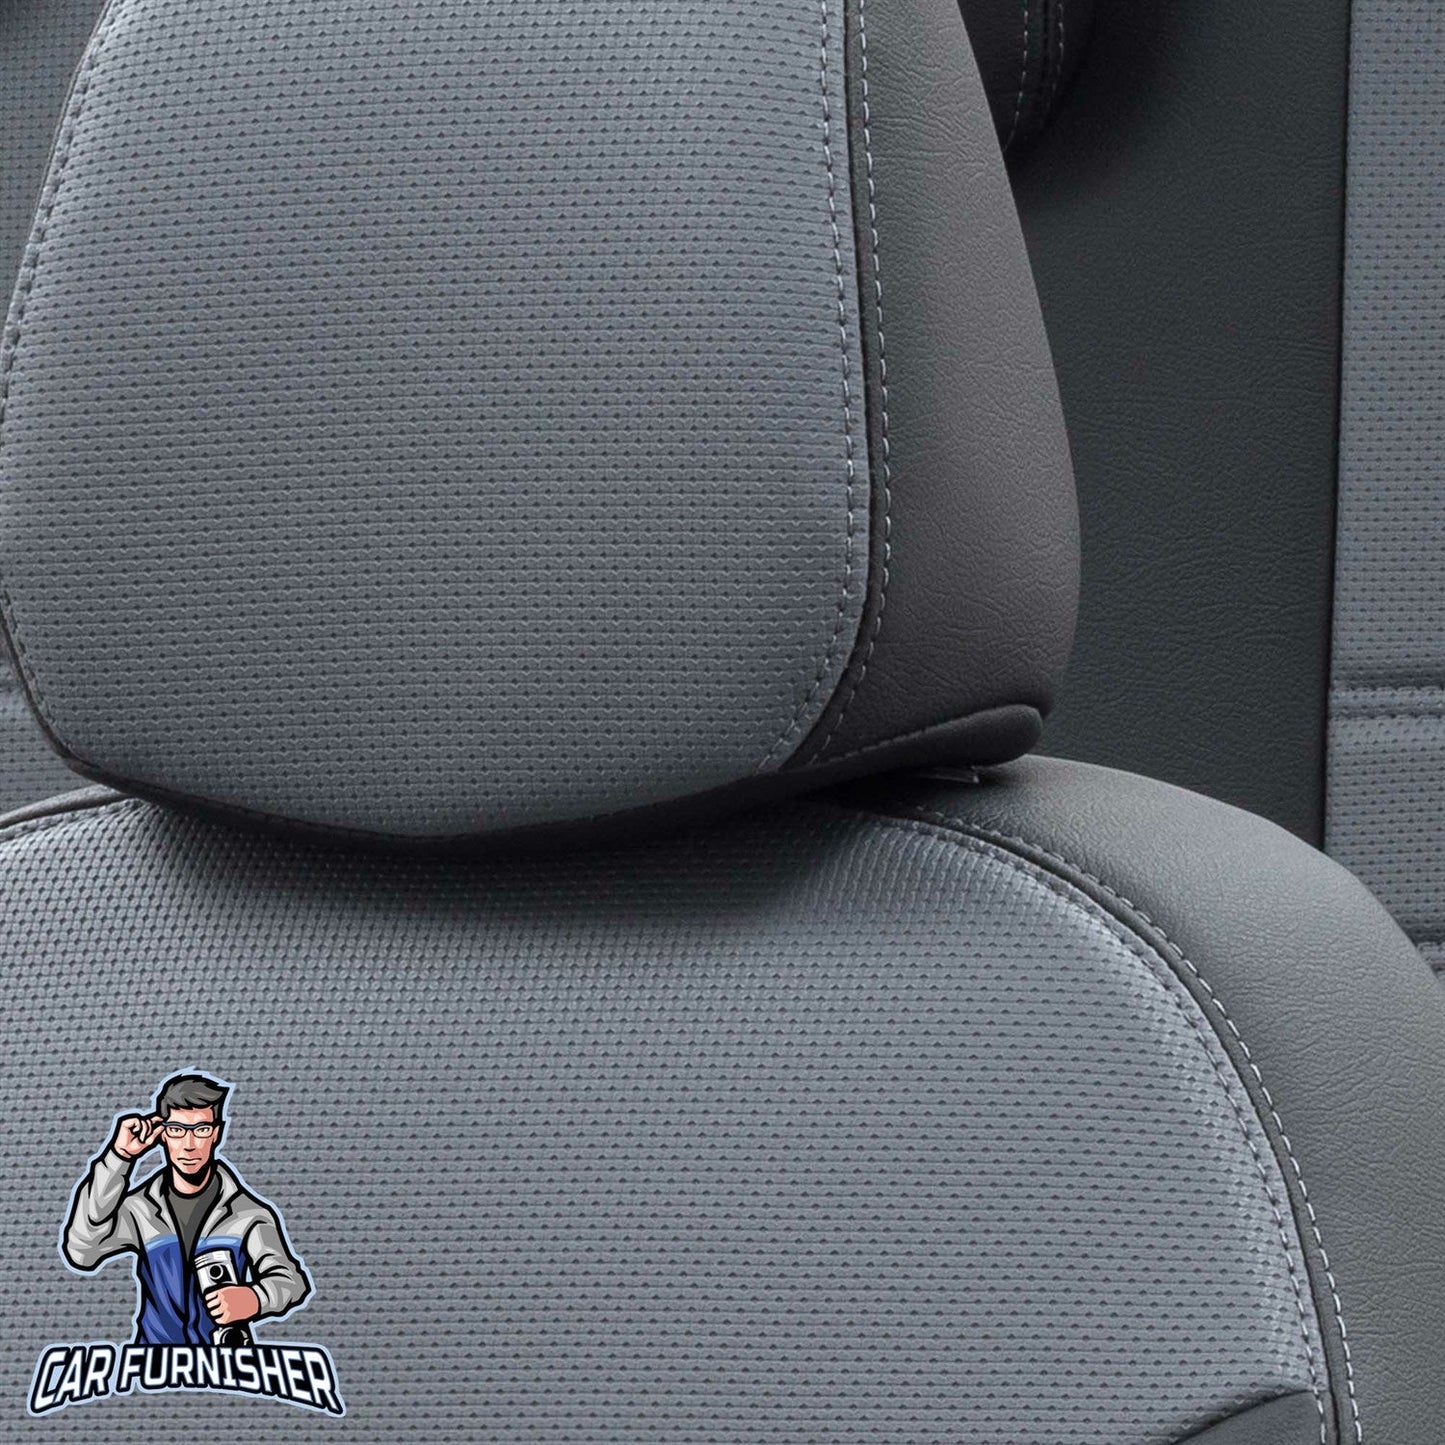 Ford F-Max Seat Cover New York Leather Design Smoked Black Front Seats (2 Seats + Handrest + Headrests) Leather